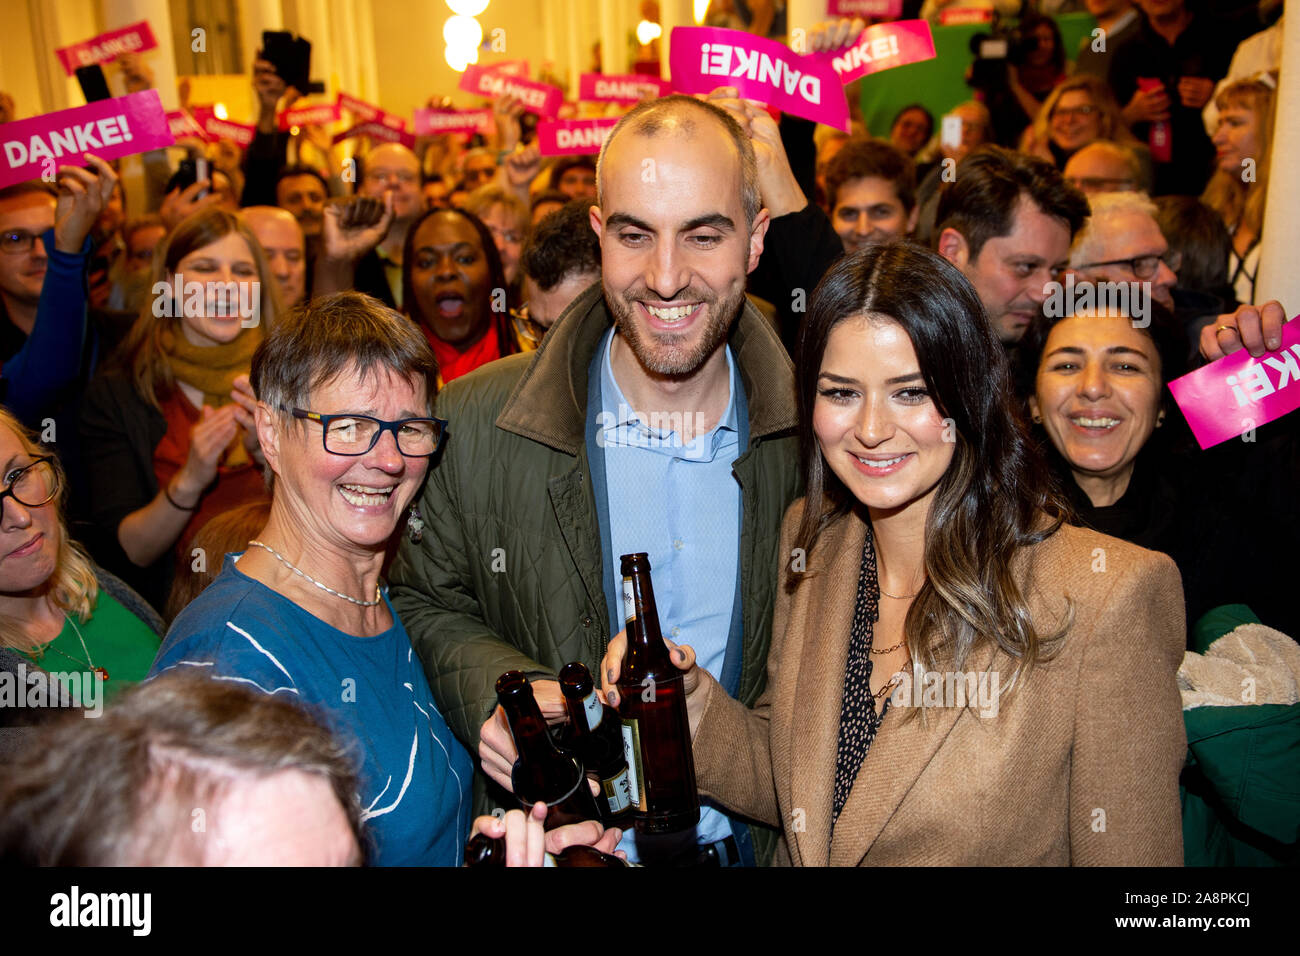 Hanover, Germany. 10th Nov, 2019. Belit Onay (Bündnis 90/Die Grünen), winner of the mayor's election, celebrates with his wife Derya (r), Gisela Witte (l), chairwoman of the city association Bündnis 90/Die Grünen, and his supporters at the election party in the Alten Magazin. Since none of the ten candidates received more than 50 percent of the votes in the first ballot on 27 October 2019, a run-off ballot was held. Credit: Hauke-Christian Dittrich/dpa/Alamy Live News Stock Photo